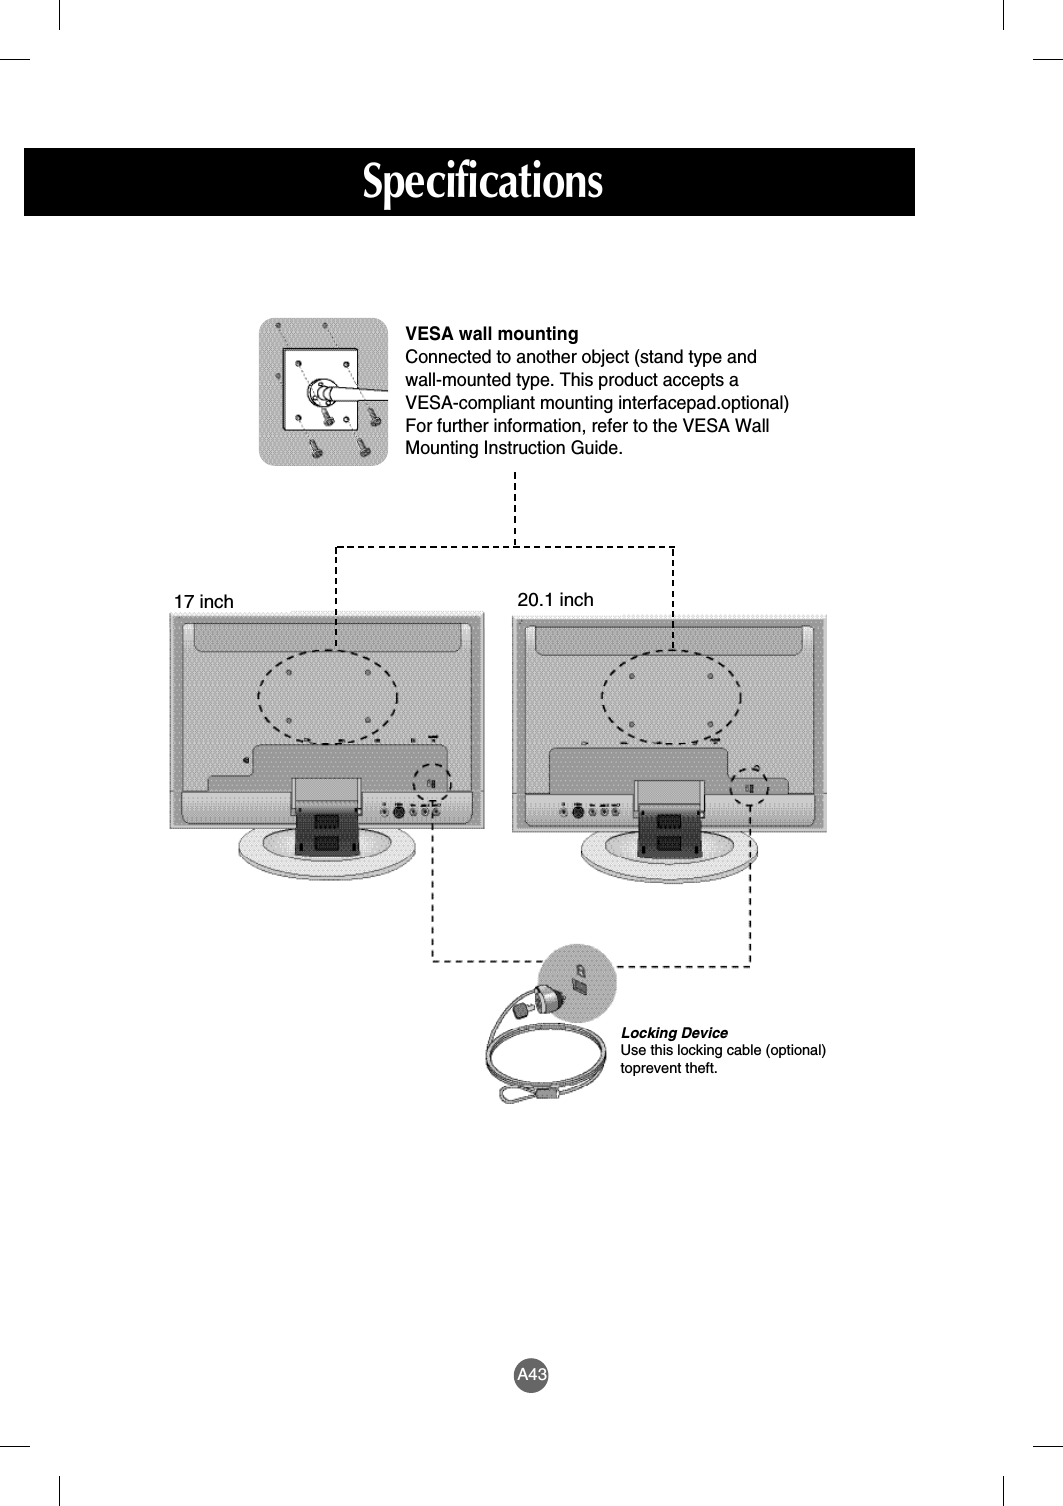 A43SpecificationsLocking DeviceUse this locking cable (optional)toprevent theft.VESA wall mountingConnected to another object (stand type and wall-mounted type. This product accepts a VESA-compliant mounting interfacepad.optional)For further information, refer to the VESA WallMounting Instruction Guide.20.1 inch17 inch